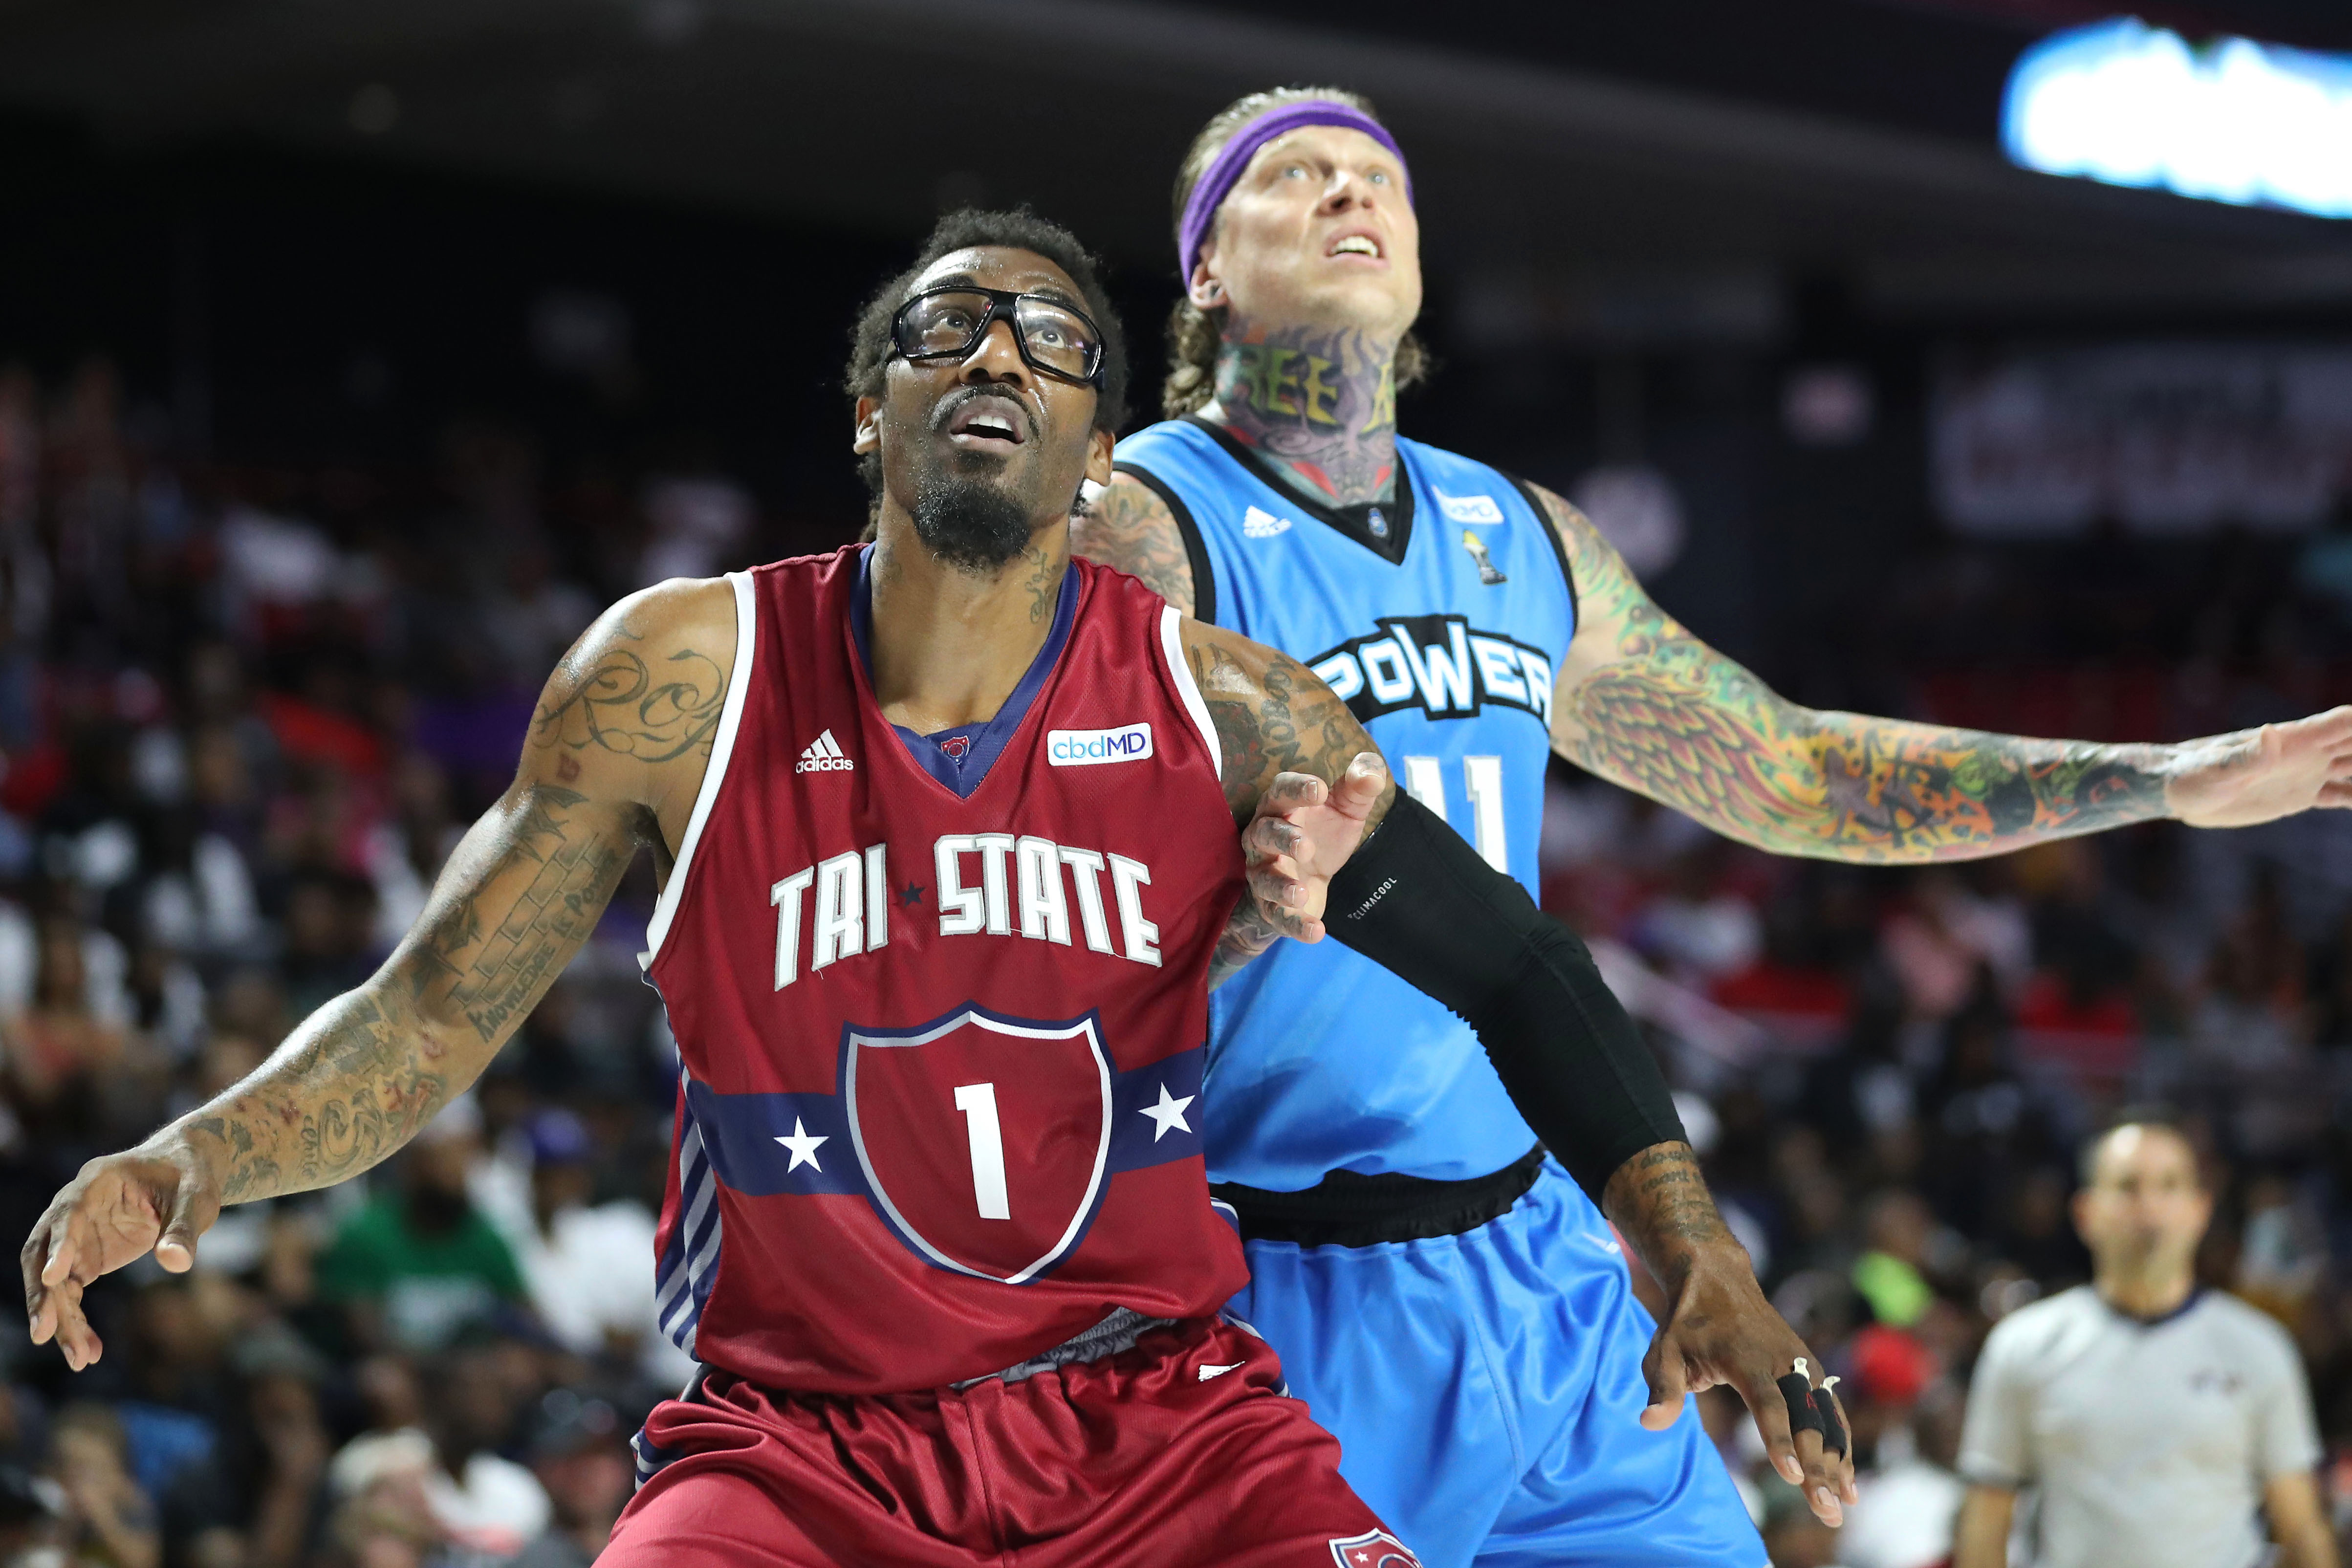 Former Knick Amar'e Stoudemire wants to play in the NBA again